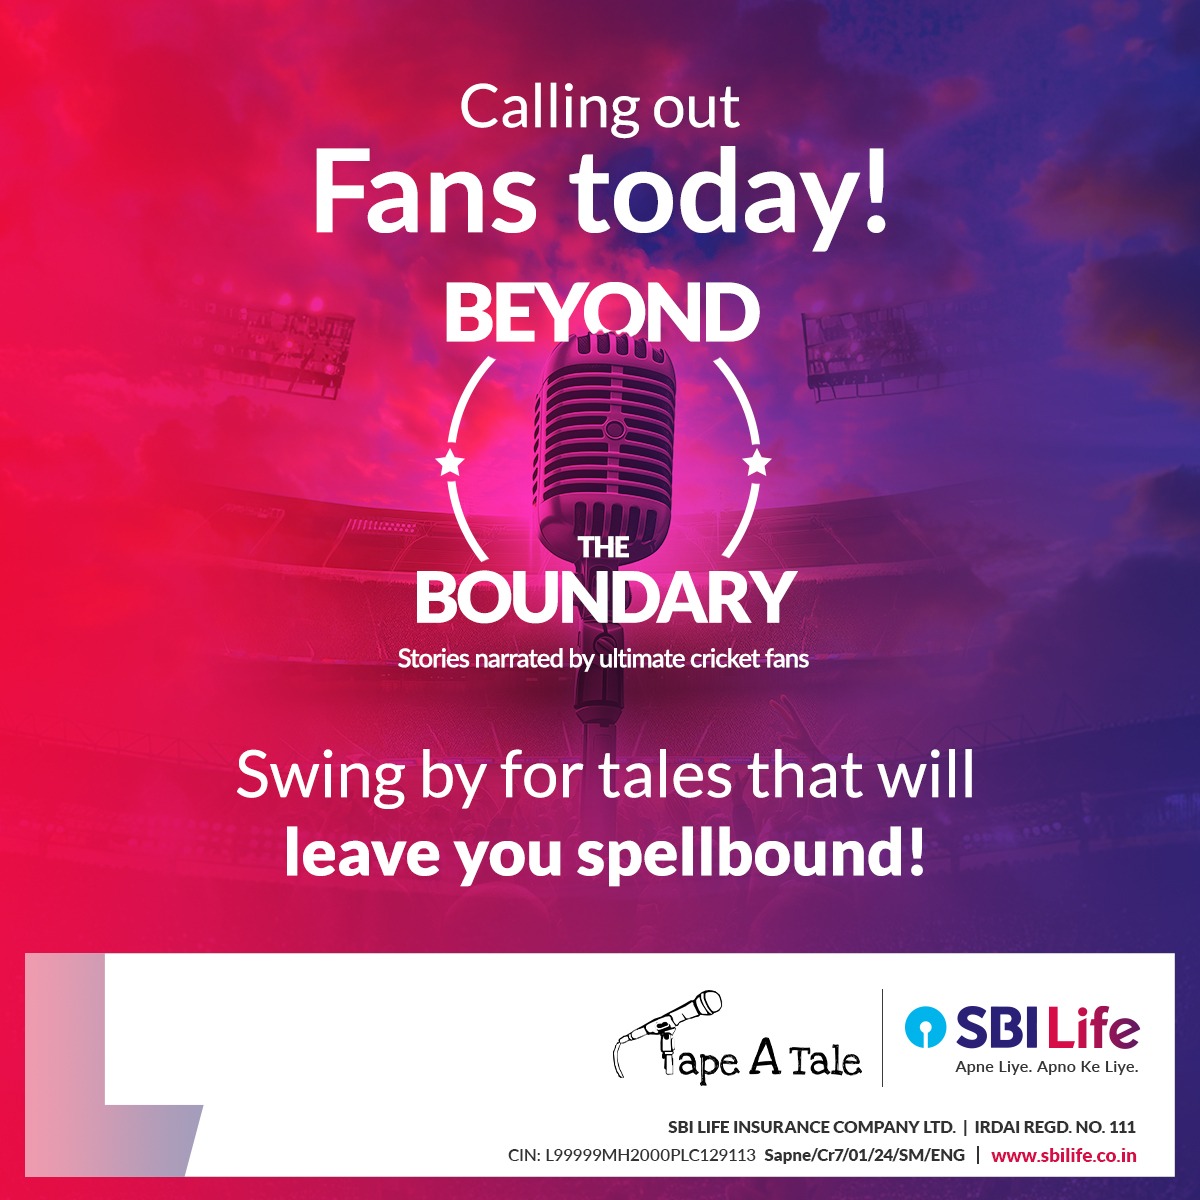 It’s official! Beyond The Boundary 2024 kicks off at 7 PM today 🔥

Registration starts at 6:30 PM. See you there! 🎉

@tapeAtale #tat #Storytelling #SpokenWord #CricketTales #CricketStories #SportsNarratives #CricketCommunity  #SBILife #ApneLiyeApnoKeLiye